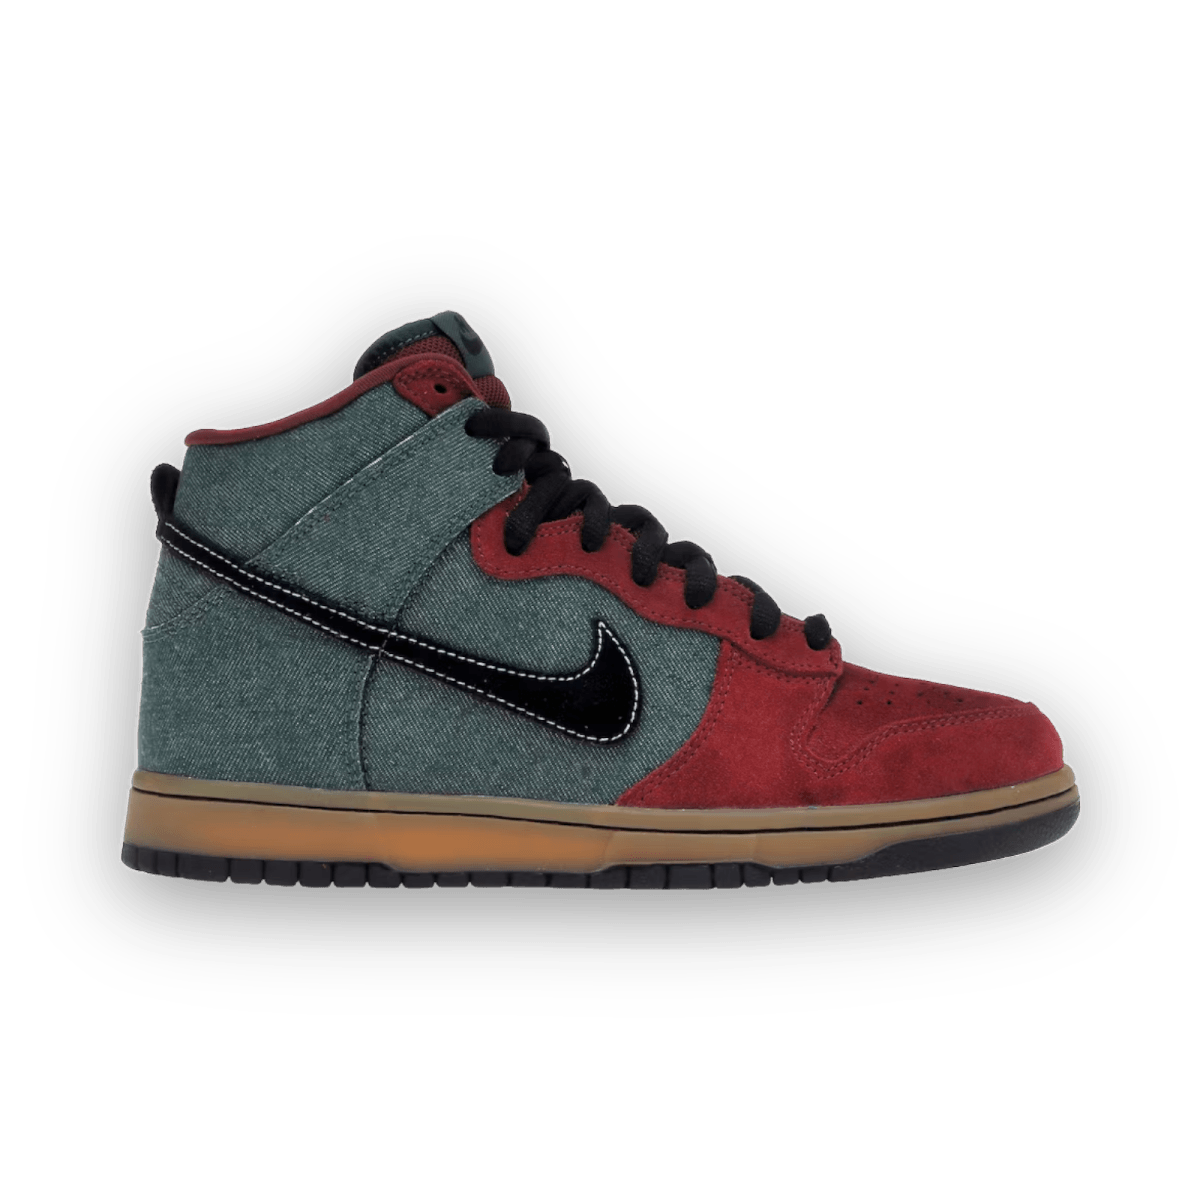 Dunk High Pro SB 'Goofy Boy' - New With Defects - High Sneaker - Jawns on Fire Sneakers & Streetwear